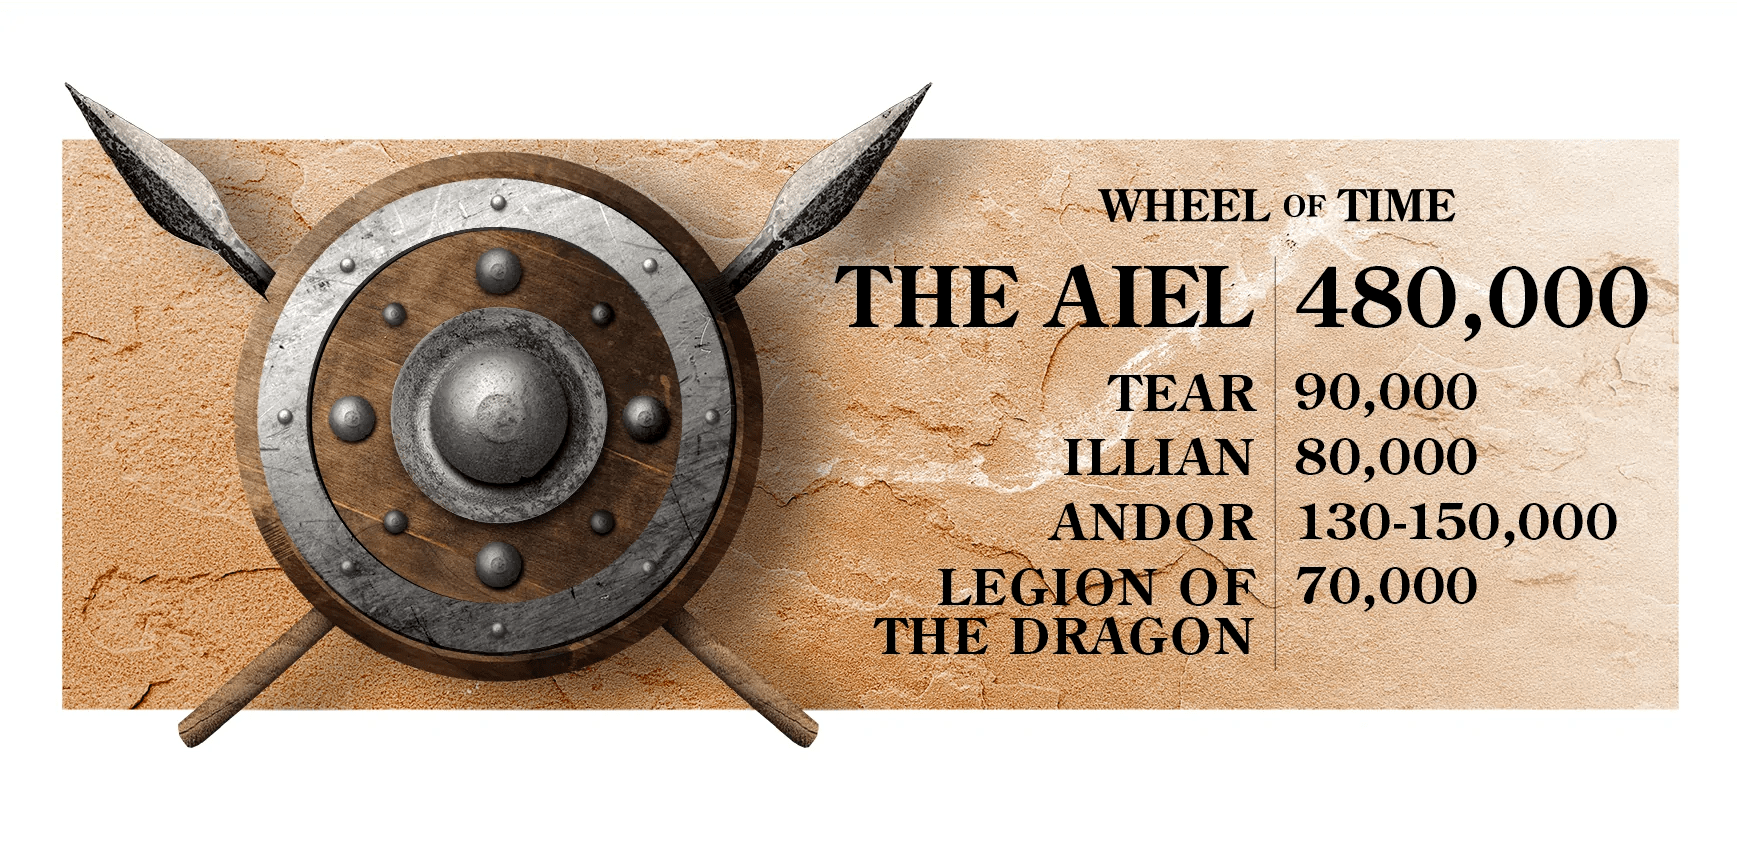 Wheel of Time army